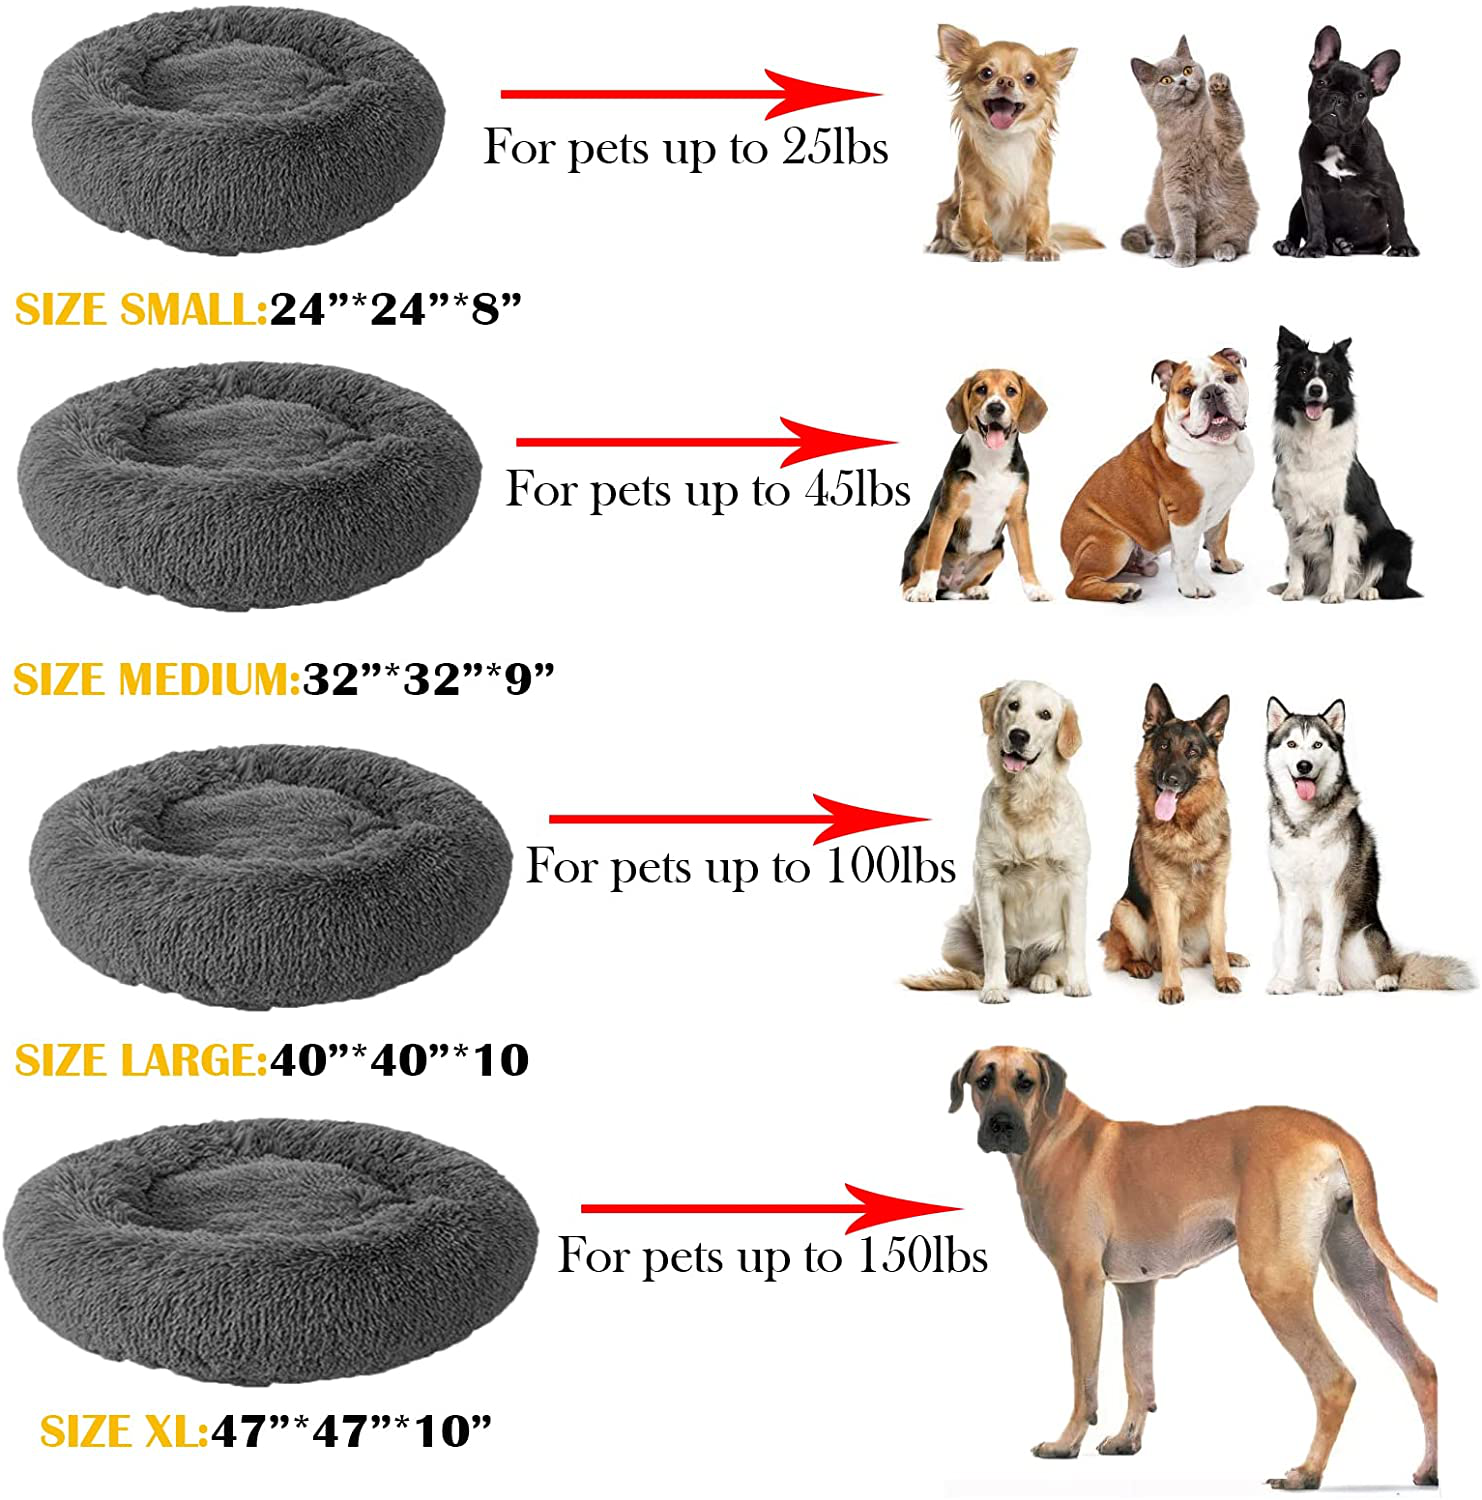 Jincheng Calming Dog Bed Cat Bed Donut, Faux Fur Pet Bed Self-Warming Donut Cuddler, Comfortable round Plush Dog Beds for Large Medium Small Dogs and Cats (24"/32"/40"/47")